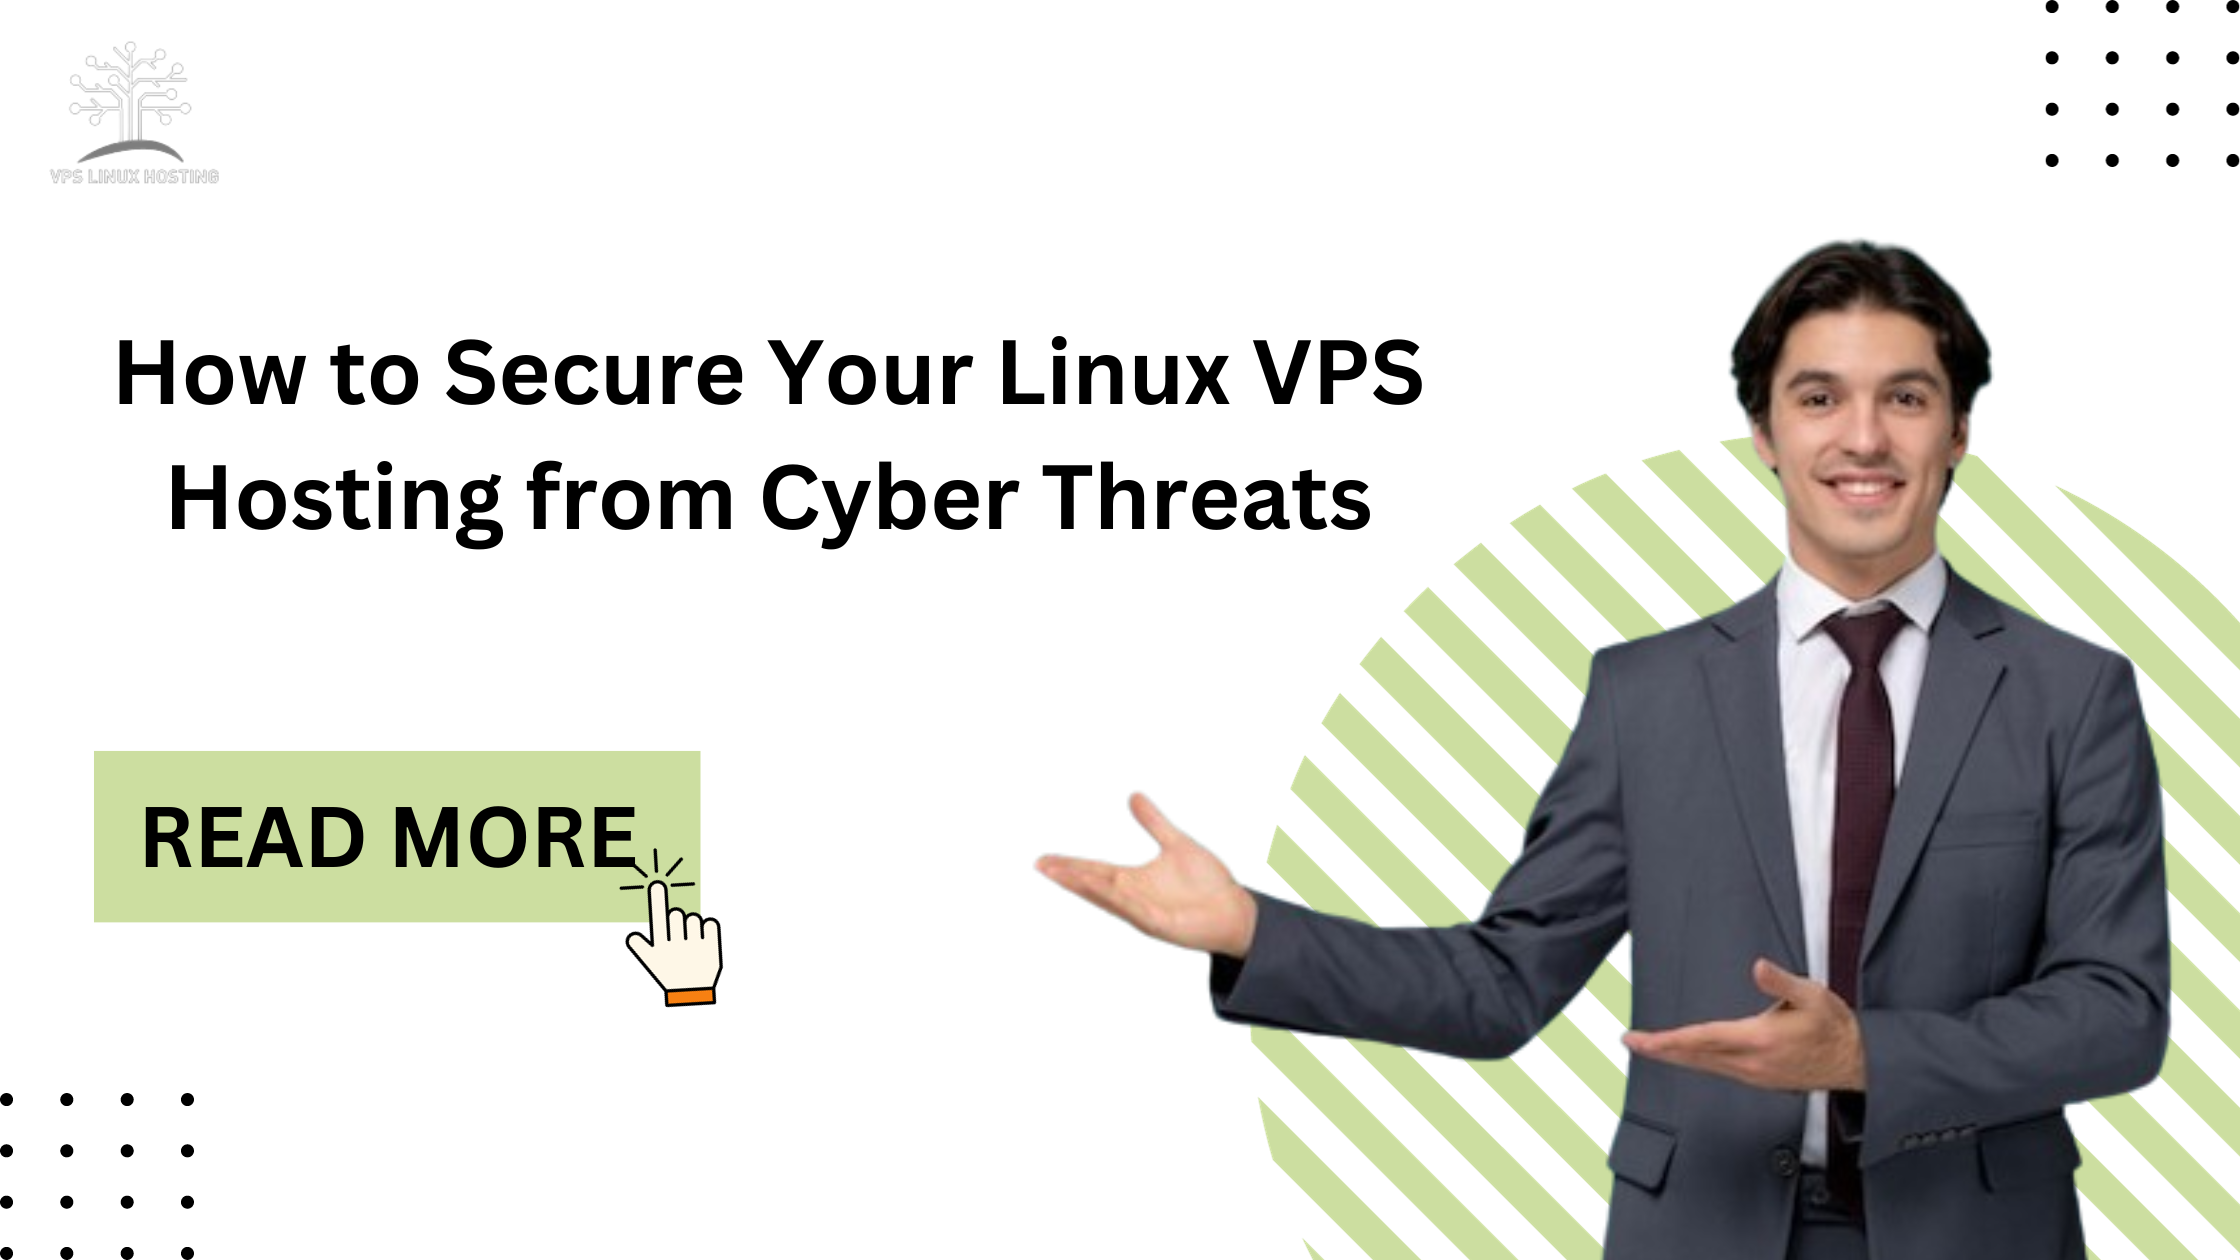 How to Secure Your Linux VPS Hosting from Cyber Threats